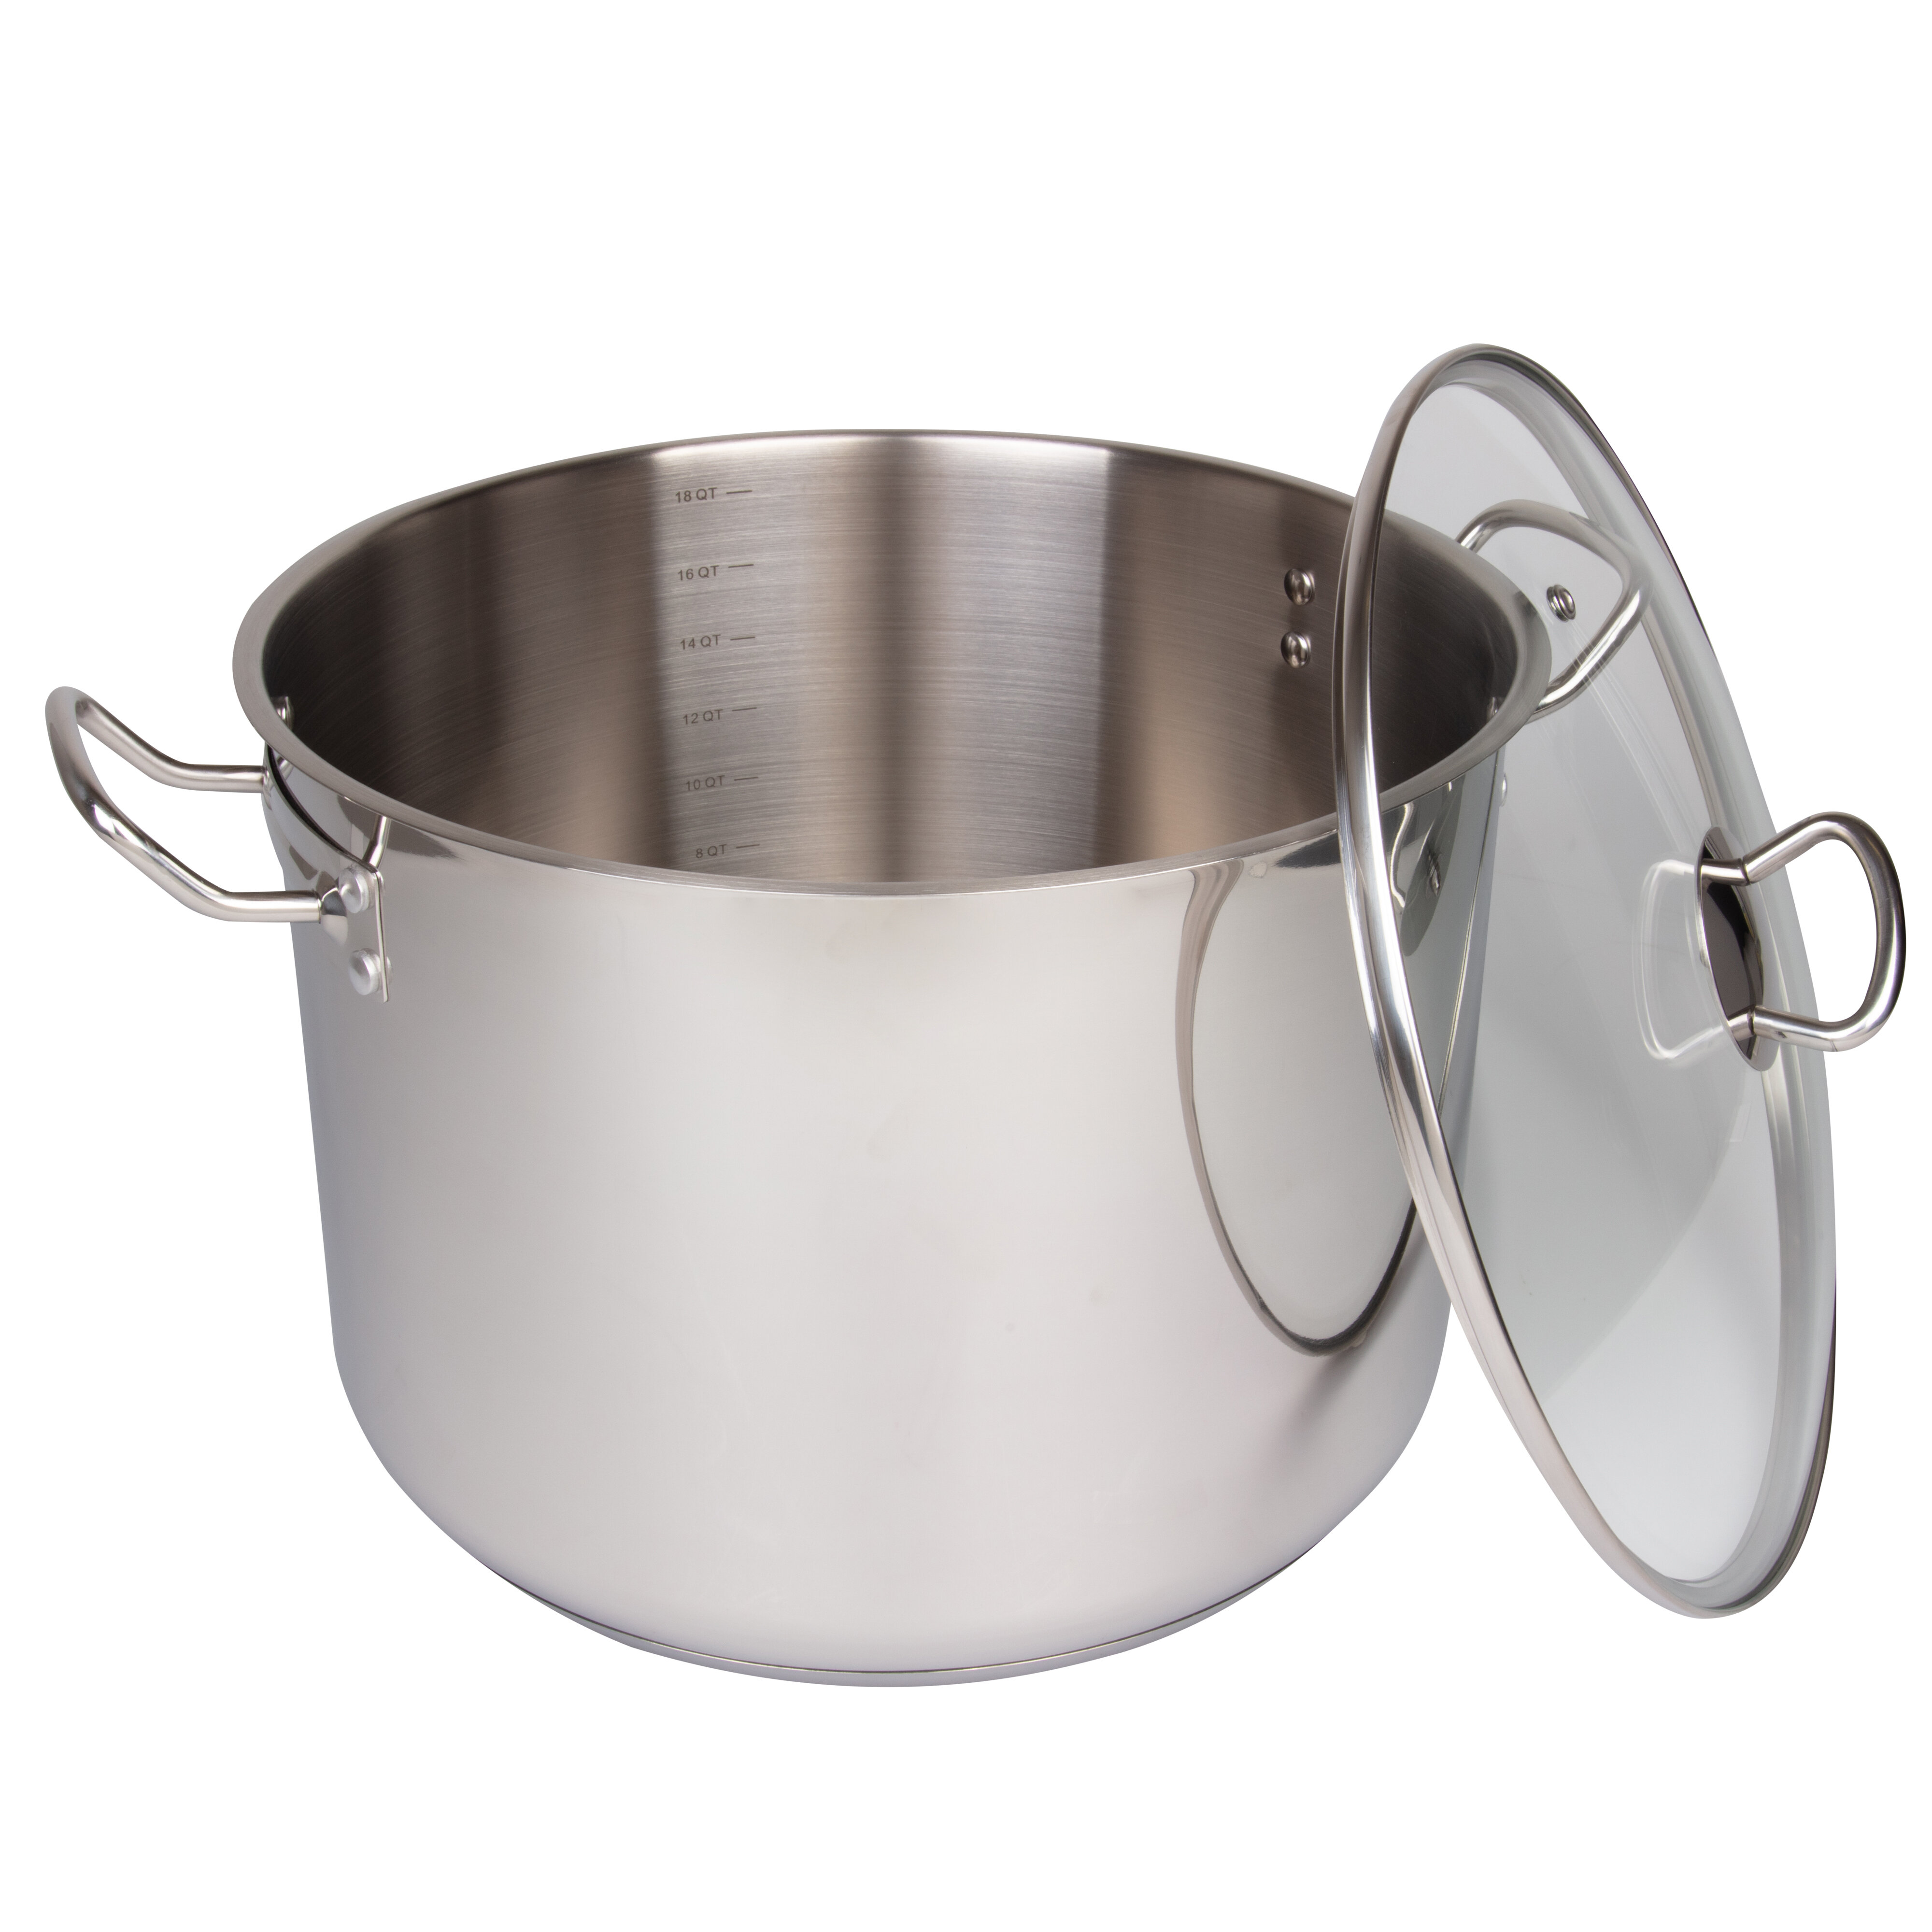 Better Chef Better Chef 10 Quart Stainless Steel Low Stock Pot with Lid at